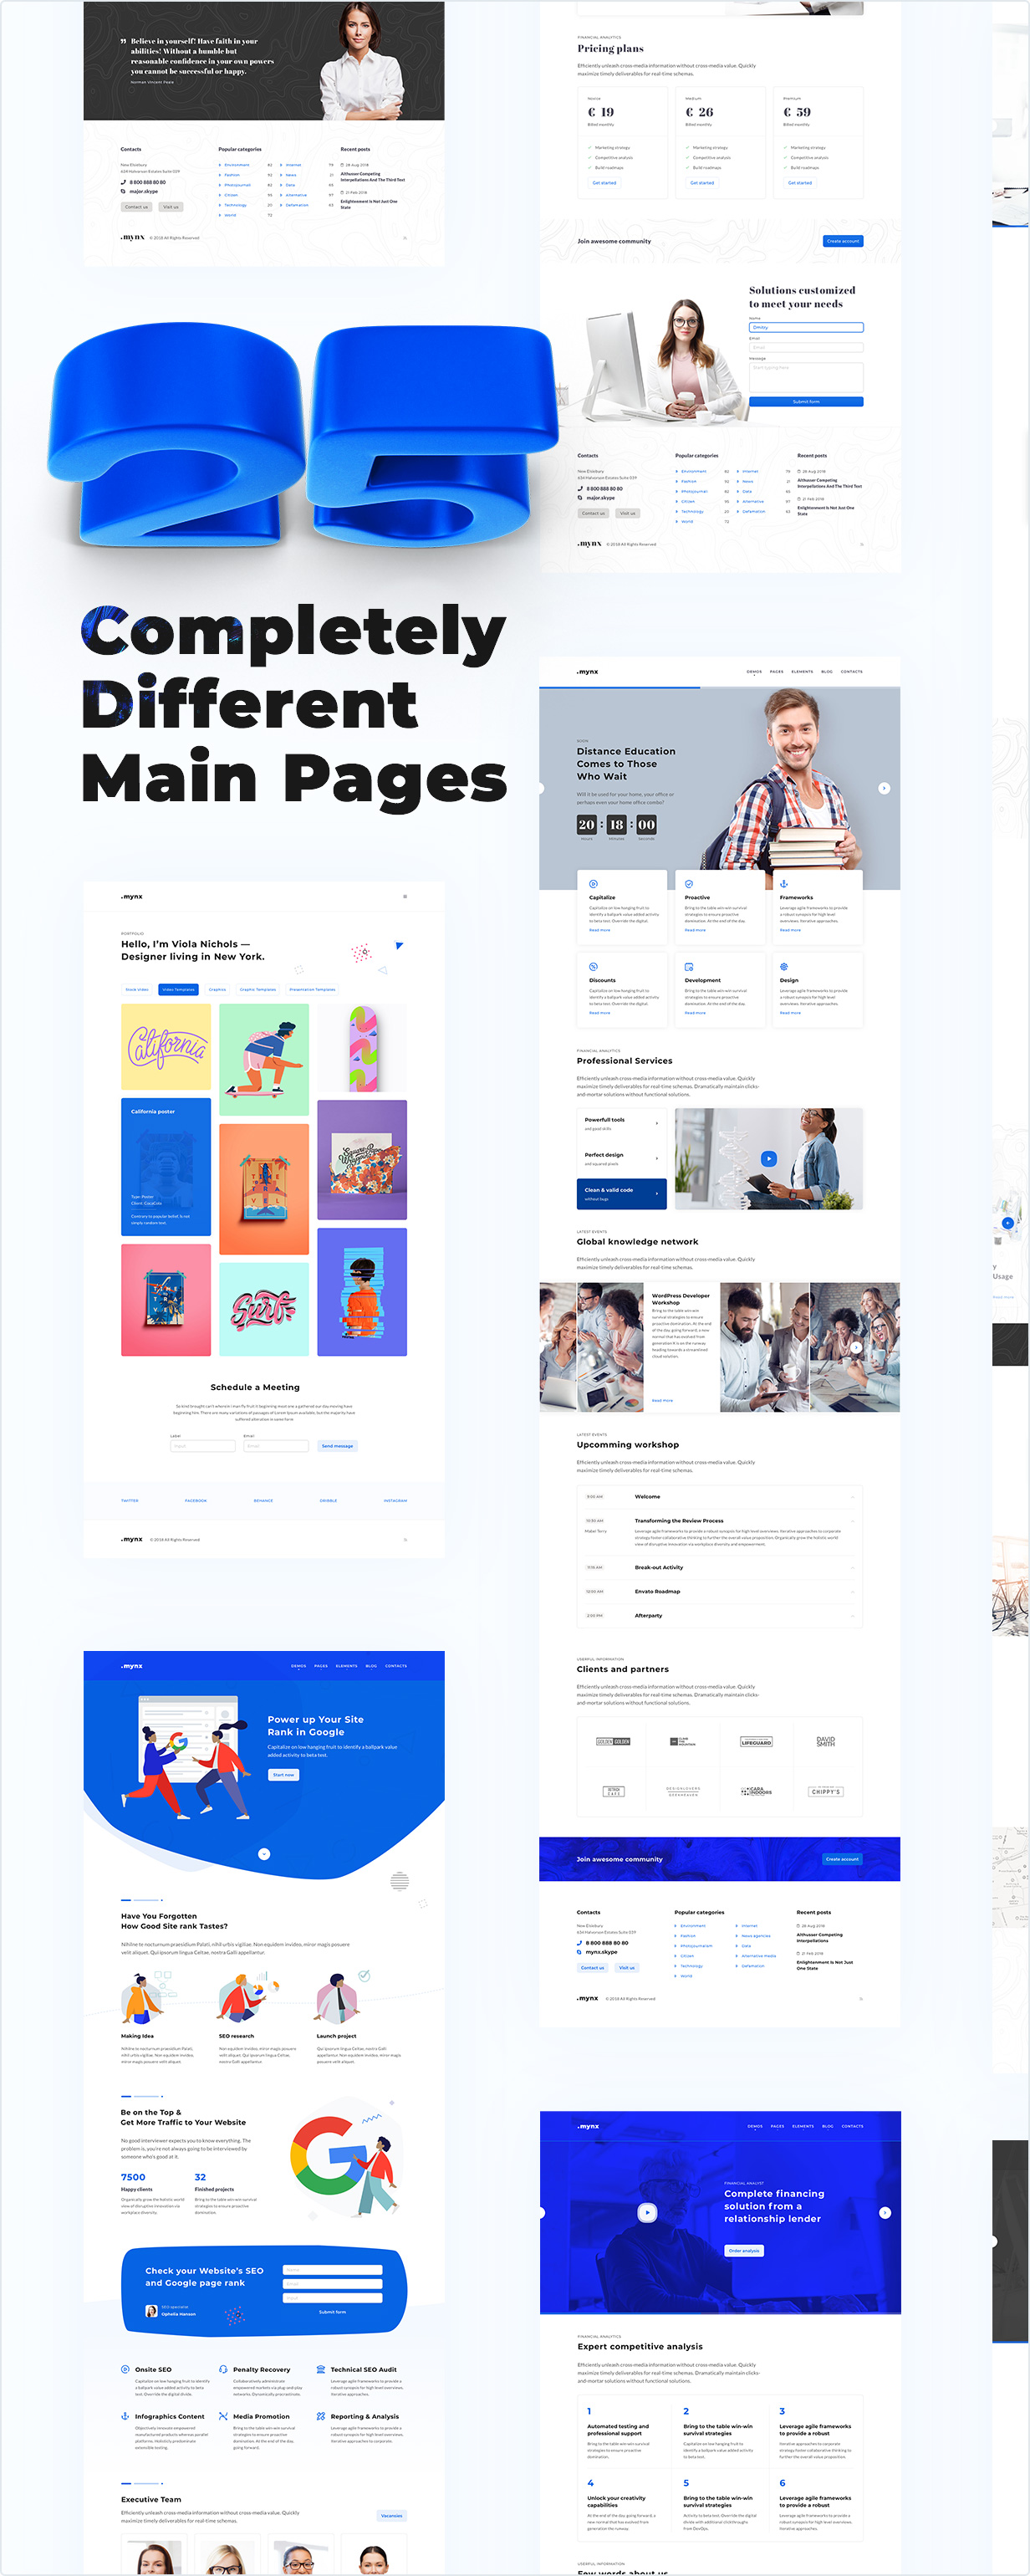 Seven Completely Different Main Pages